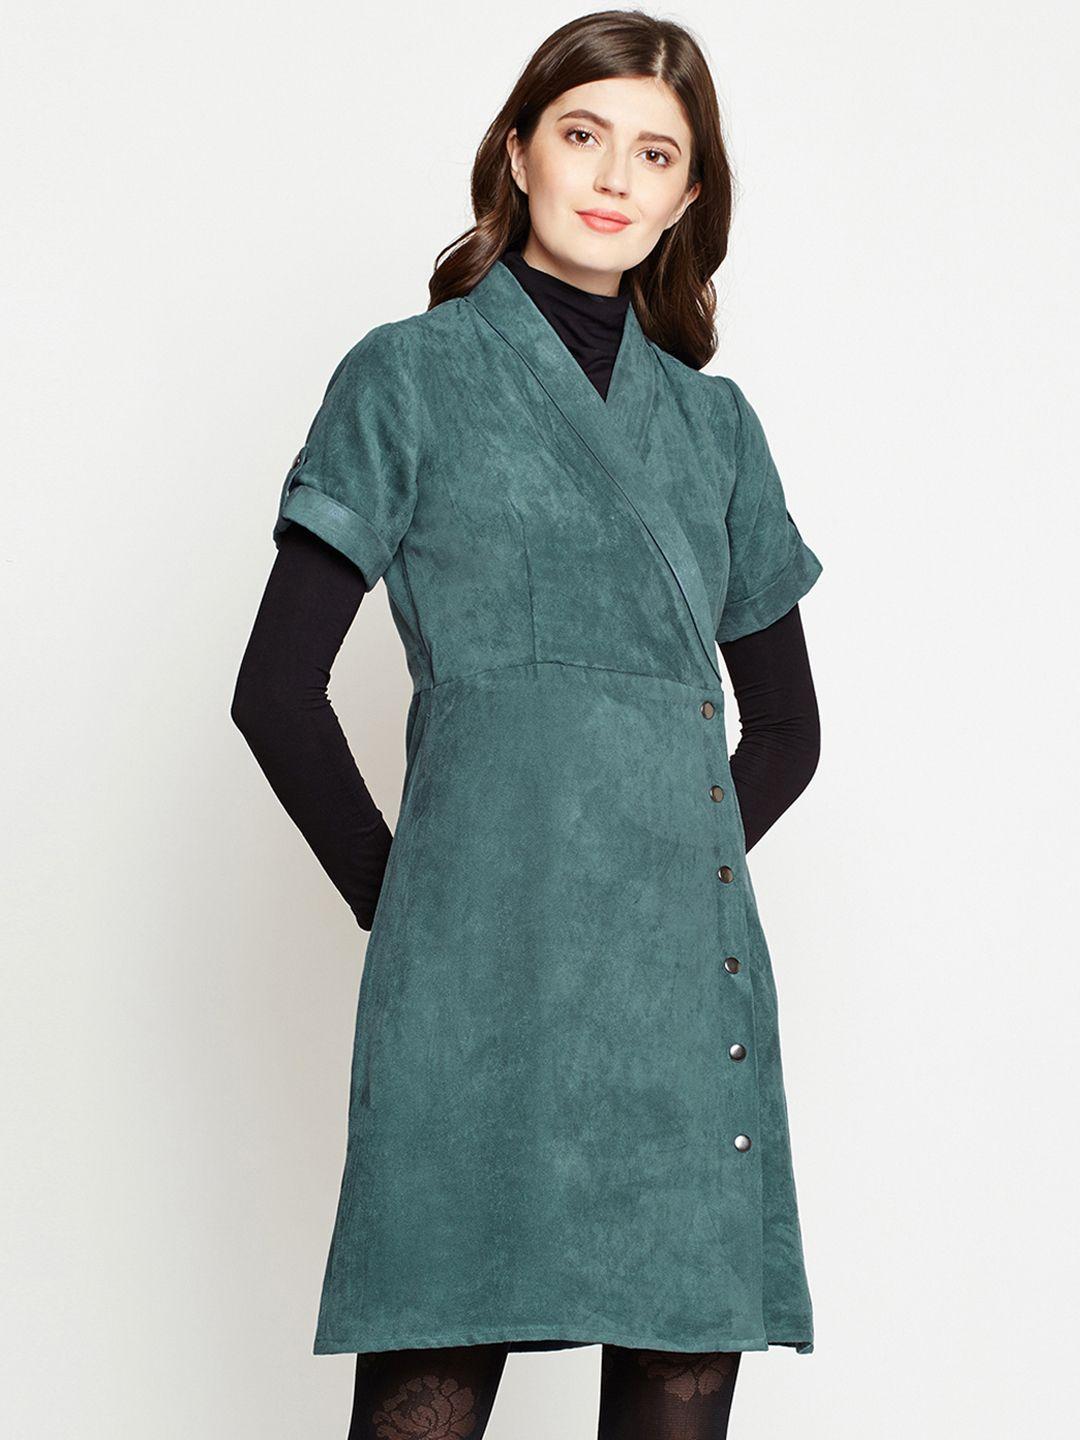 marie claire women sea green solid wrap dress